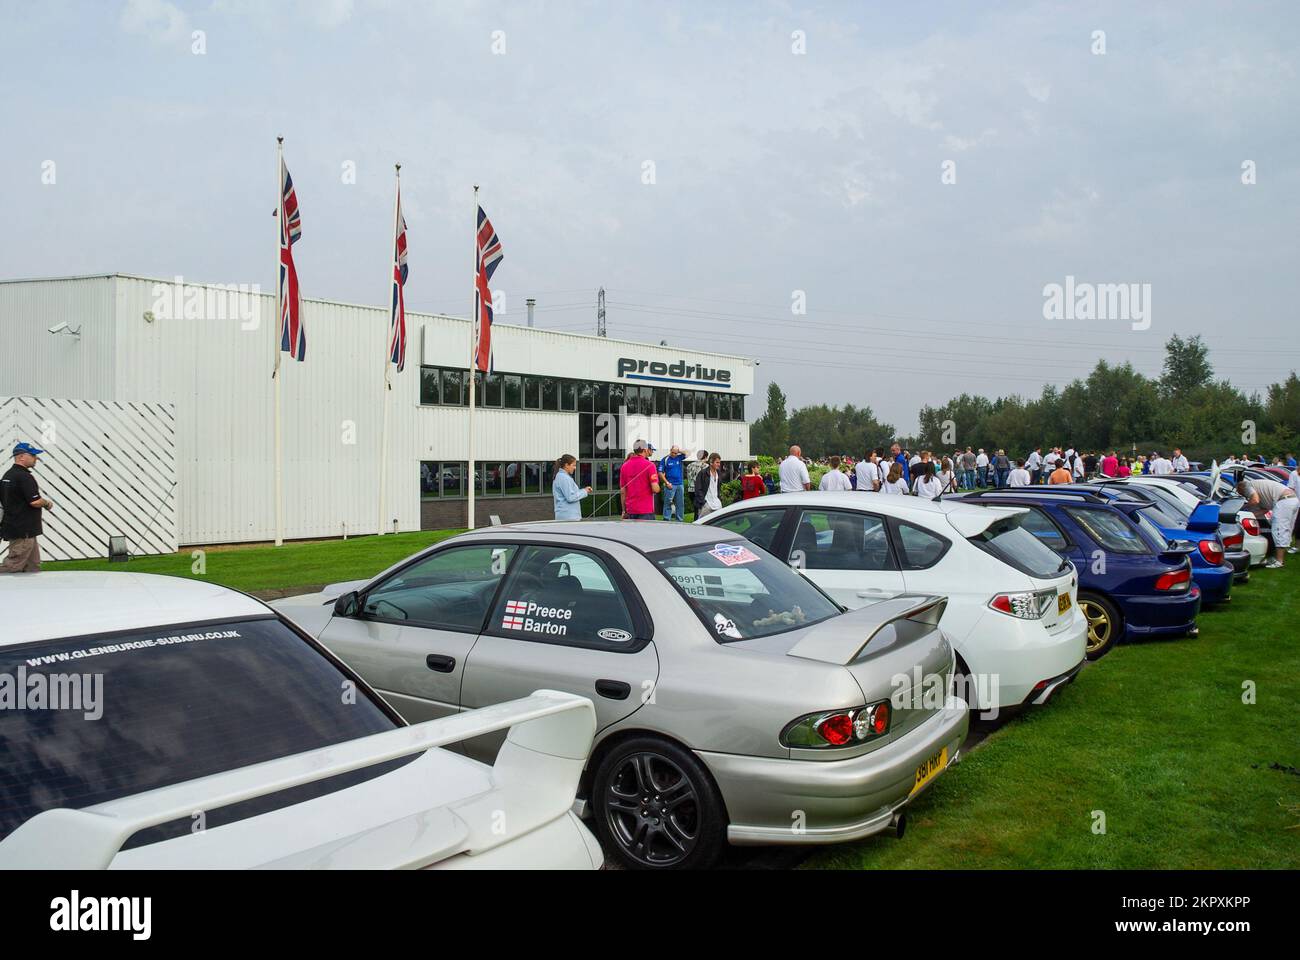 McRae Gathering. Around 1200 Subaru Impreza cars gathered at Prodrive HQ in memory of Colin McRae on anniversary of his death. Outside offices Stock Photo